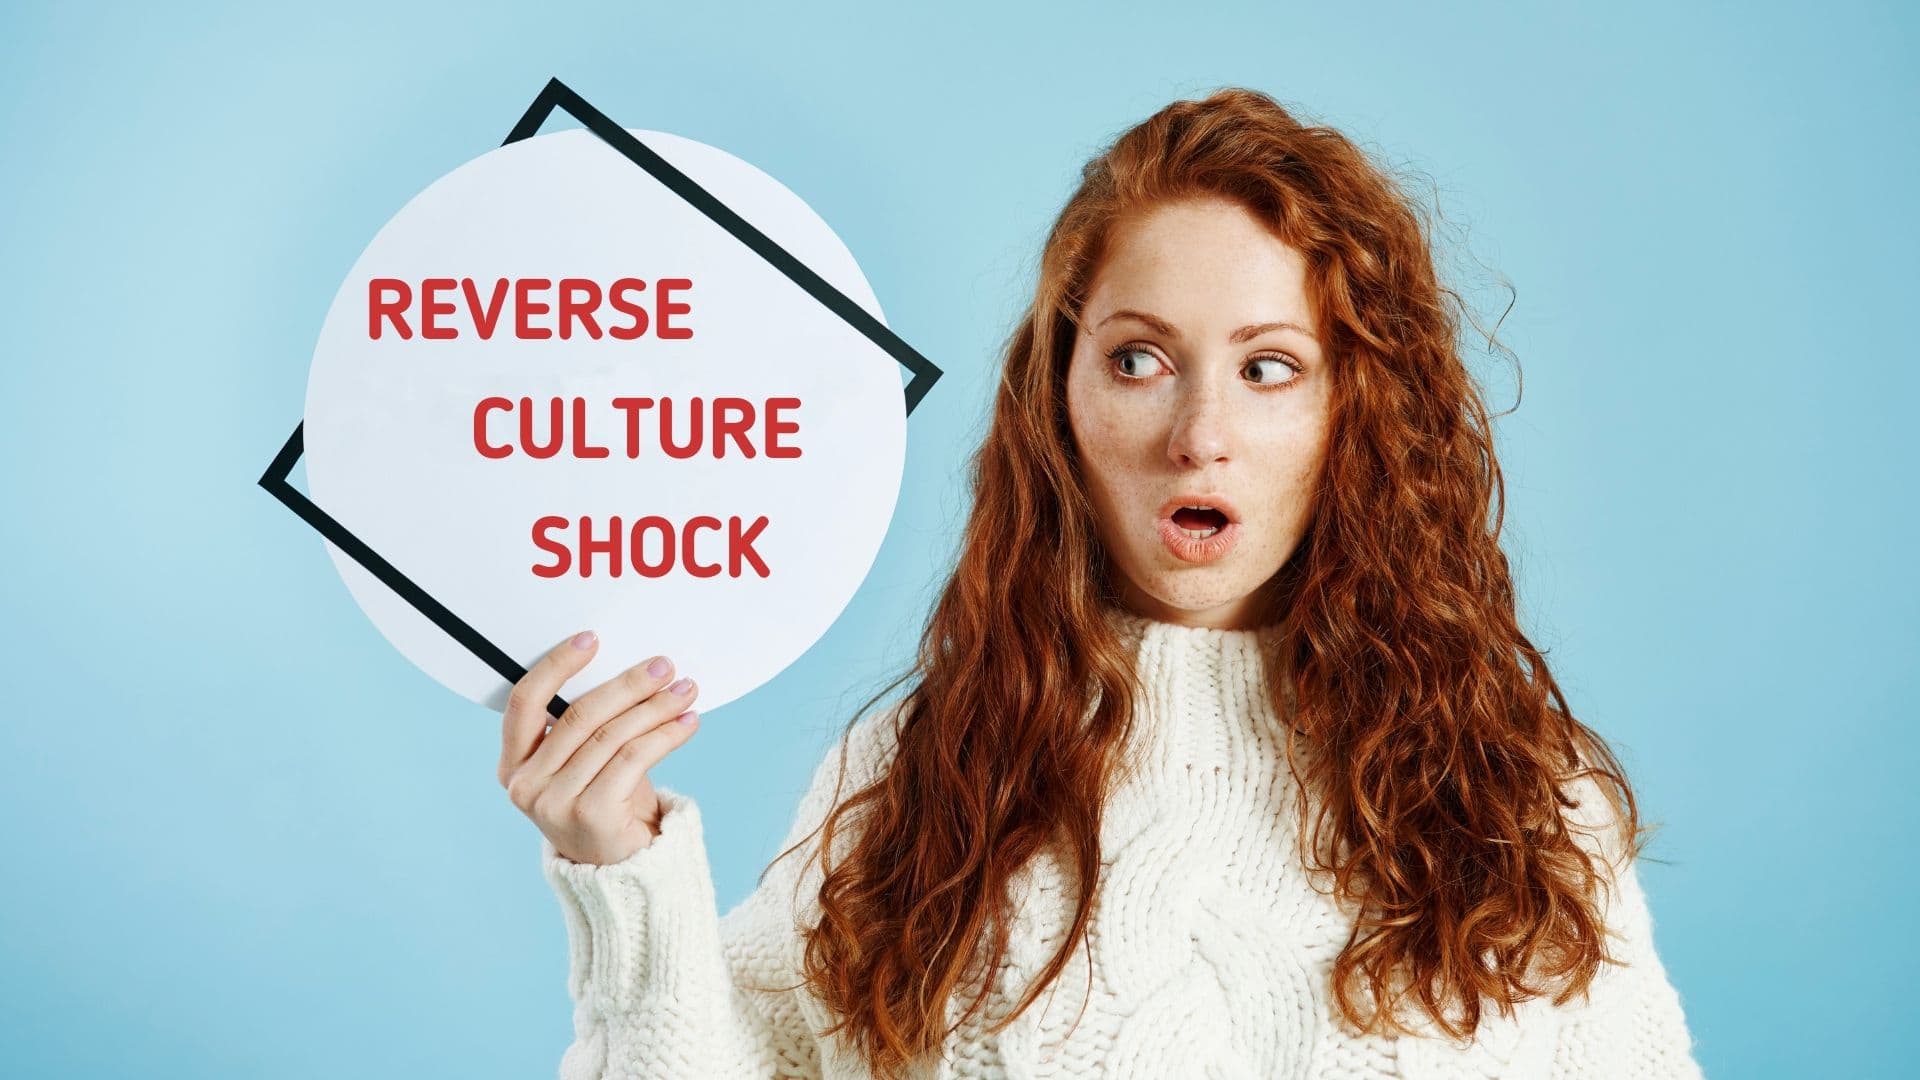 Signs of reverse culture shock